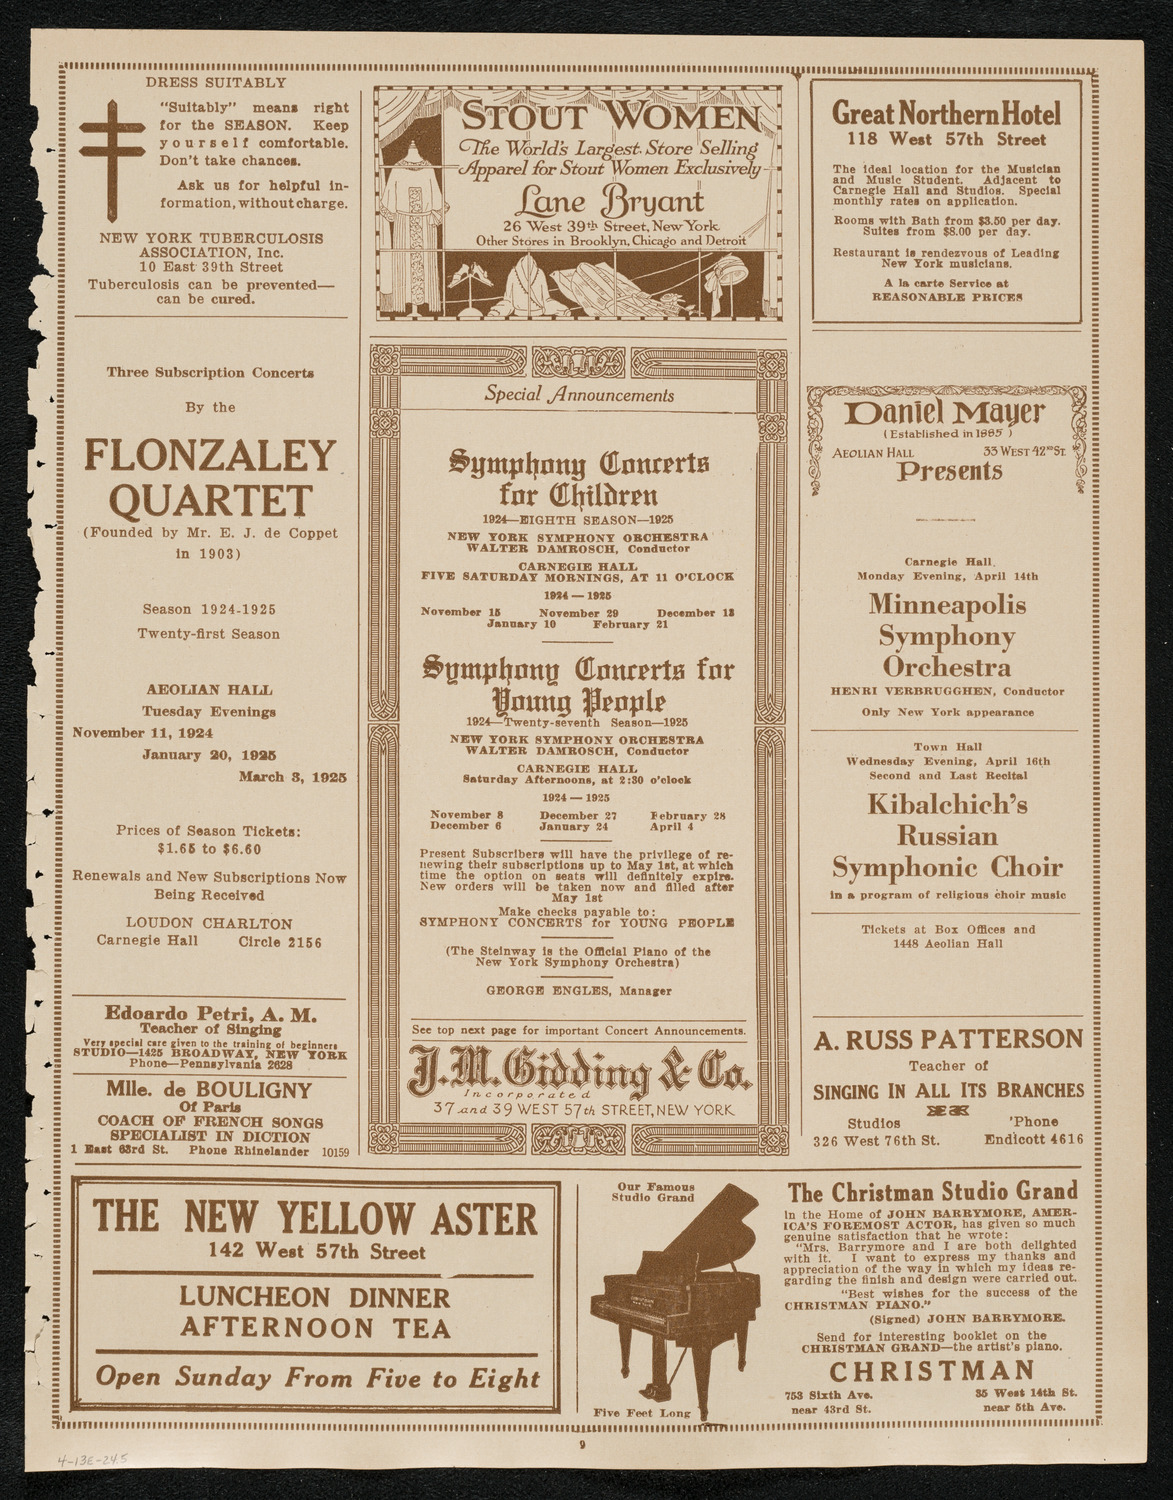 Benefit: Jewish Home for Convalescents, April 13, 1924, program page 9